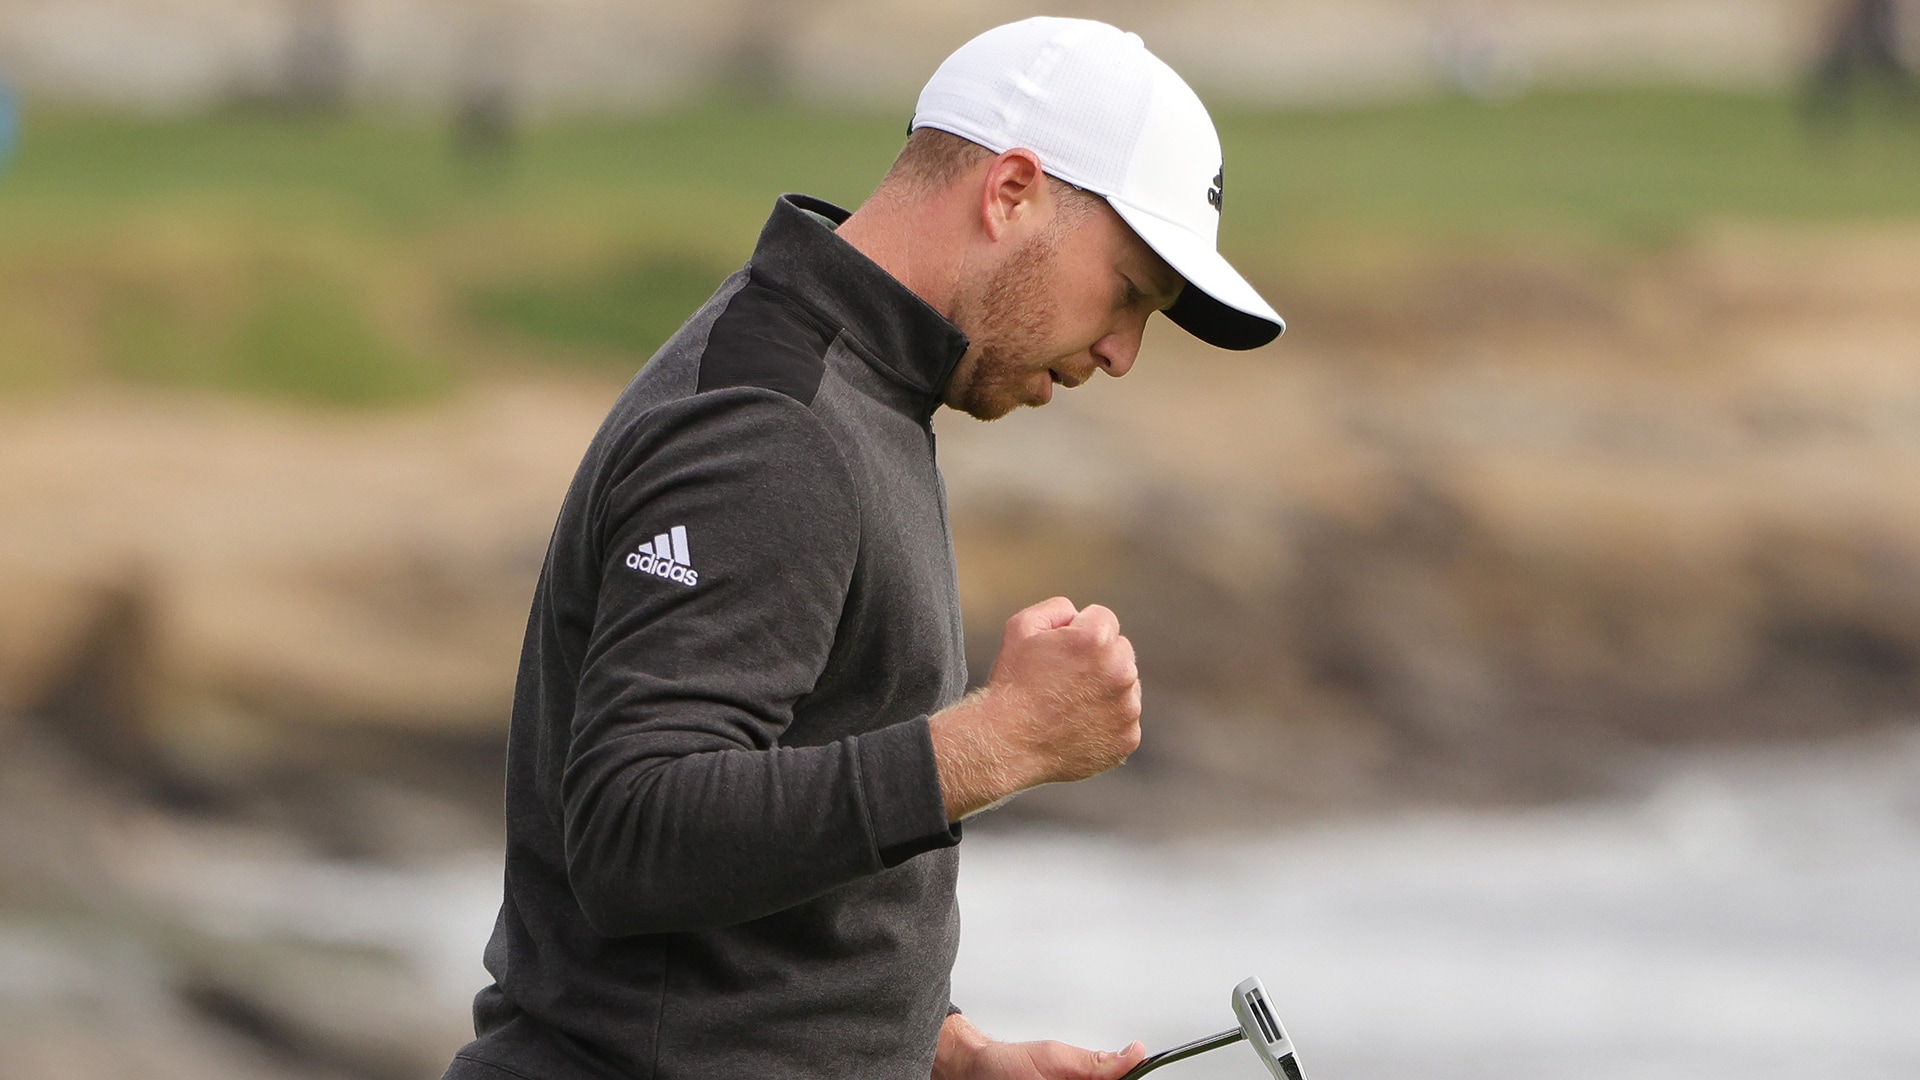 Watch: Putt of his life gives Daniel Berger closing eagle, Pebble Beach title 2